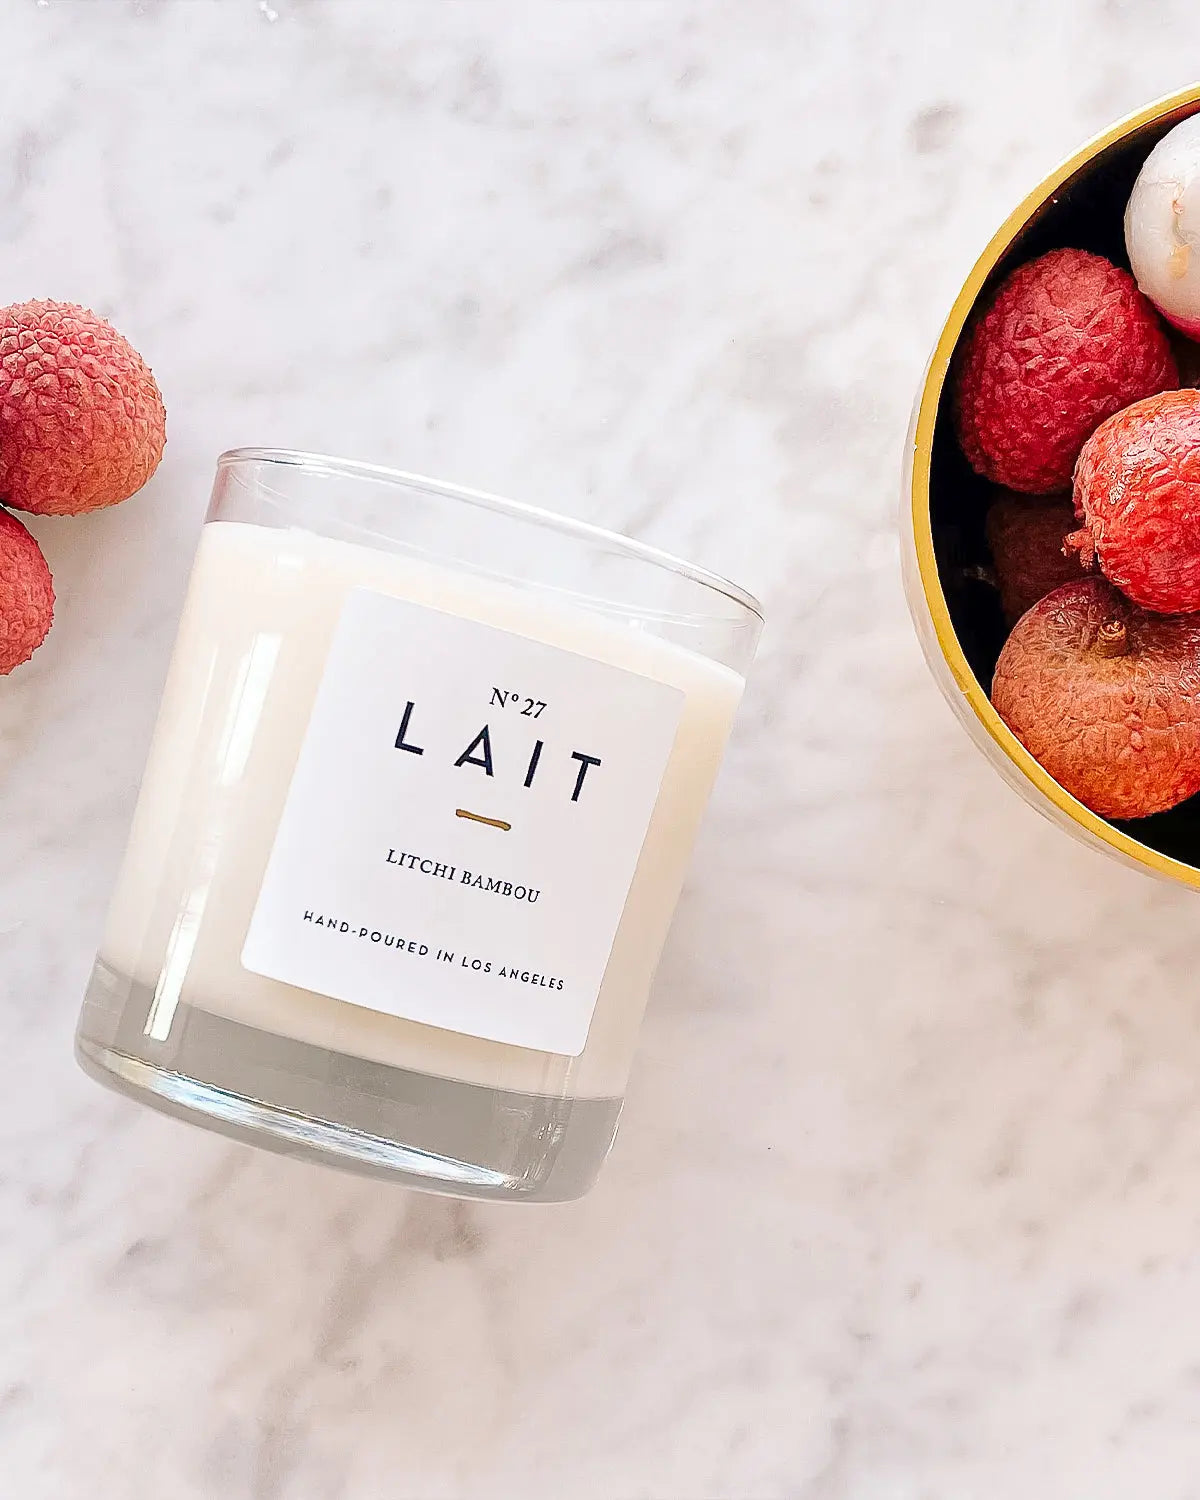 N°27 LITCHI BAMBOU (LYCHEE BAMBOO) SHOP LAIT